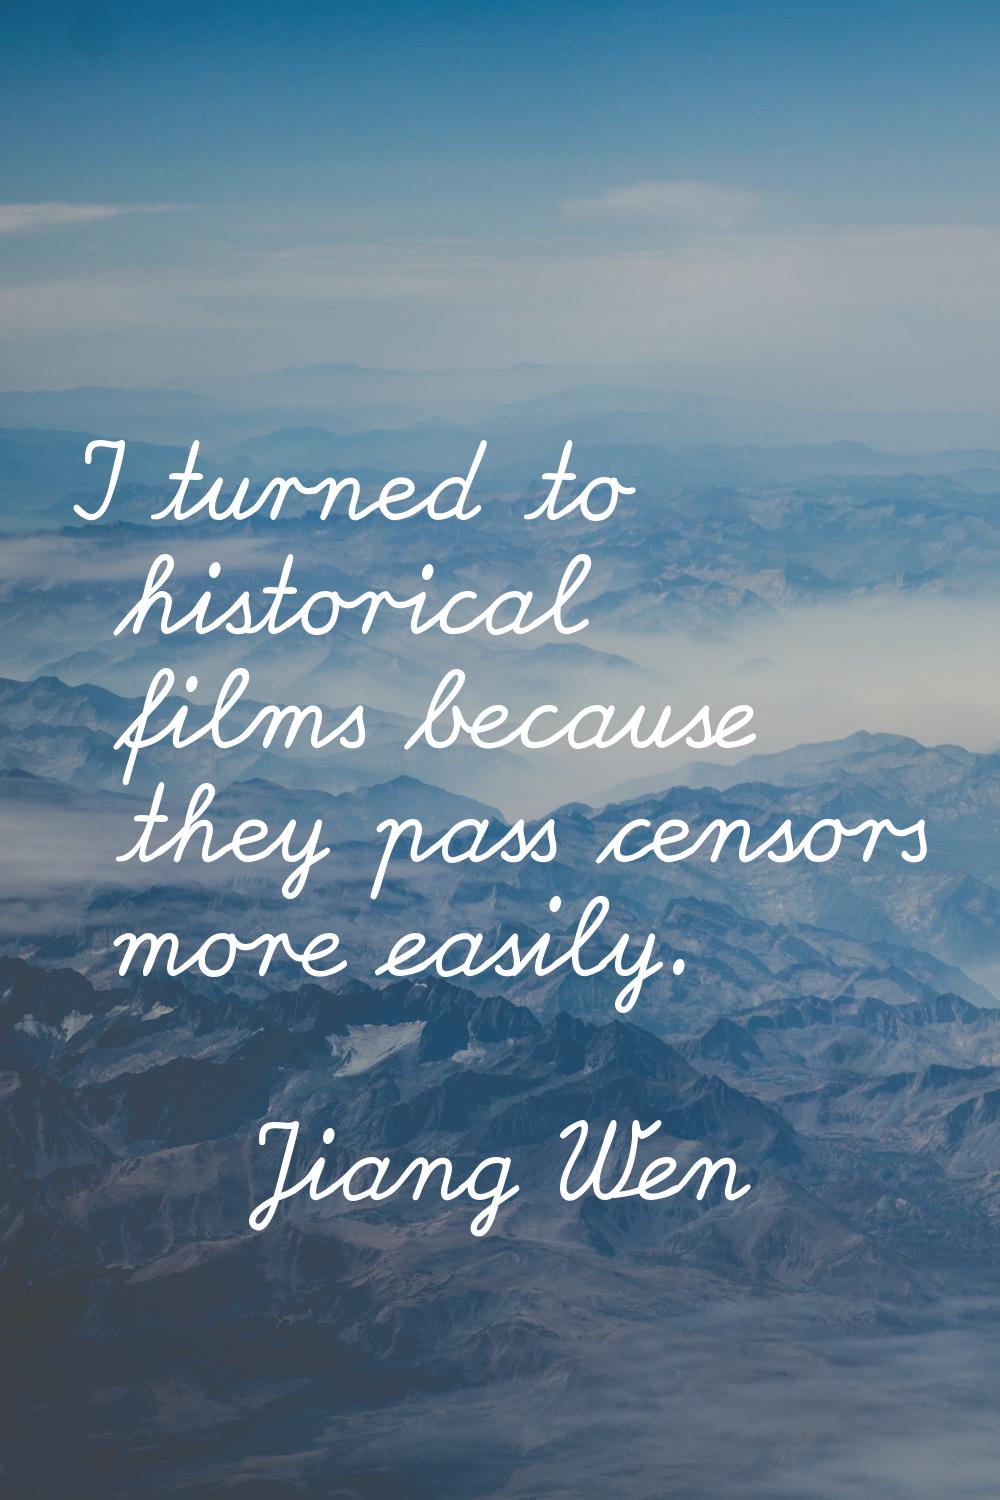 I turned to historical films because they pass censors more easily.